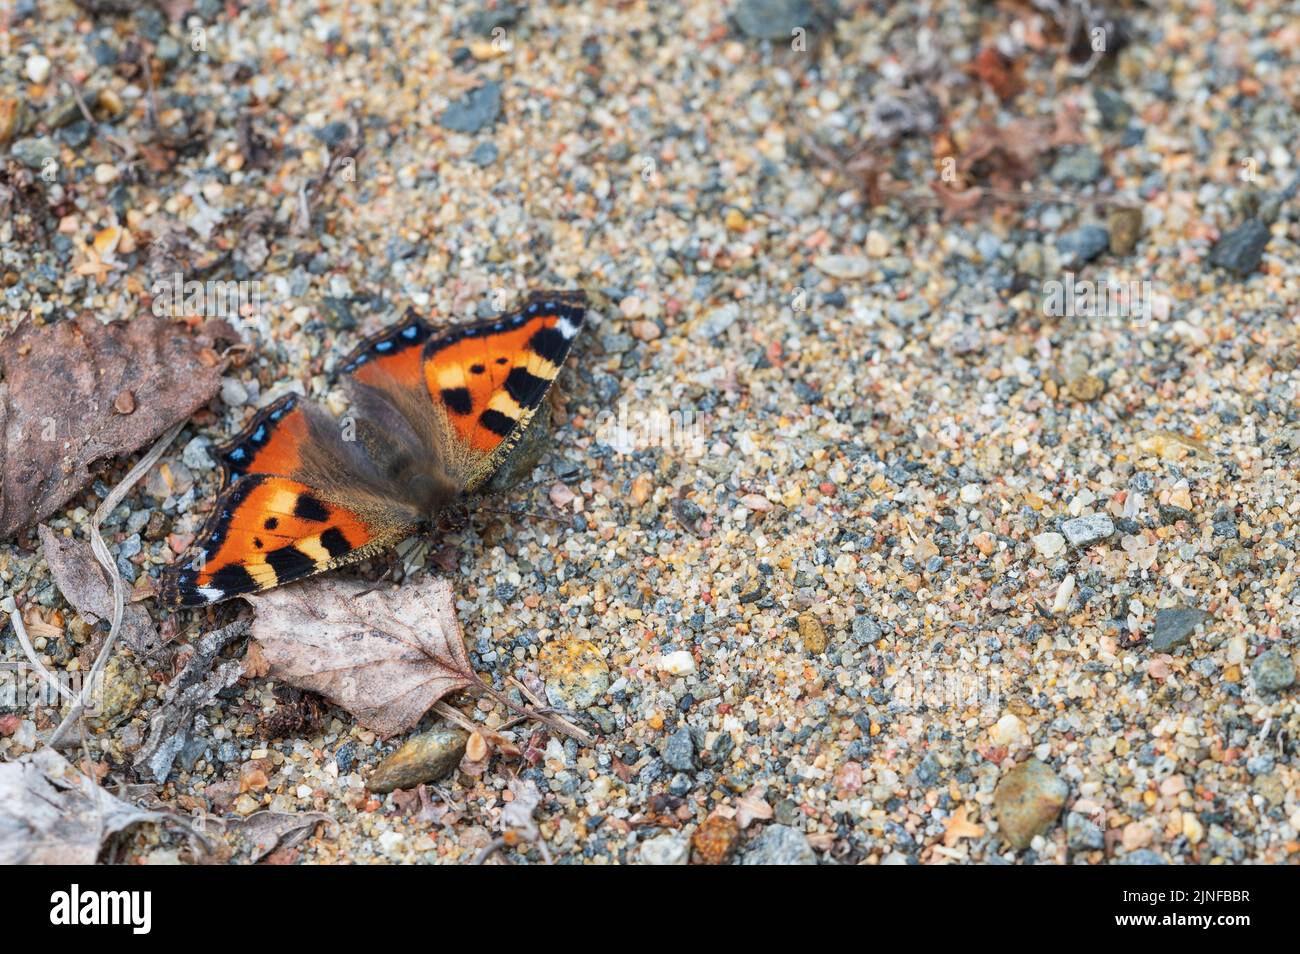 Small tortoiseshell butterfly, Aglais urticae, resting on sandy surface Stock Photo